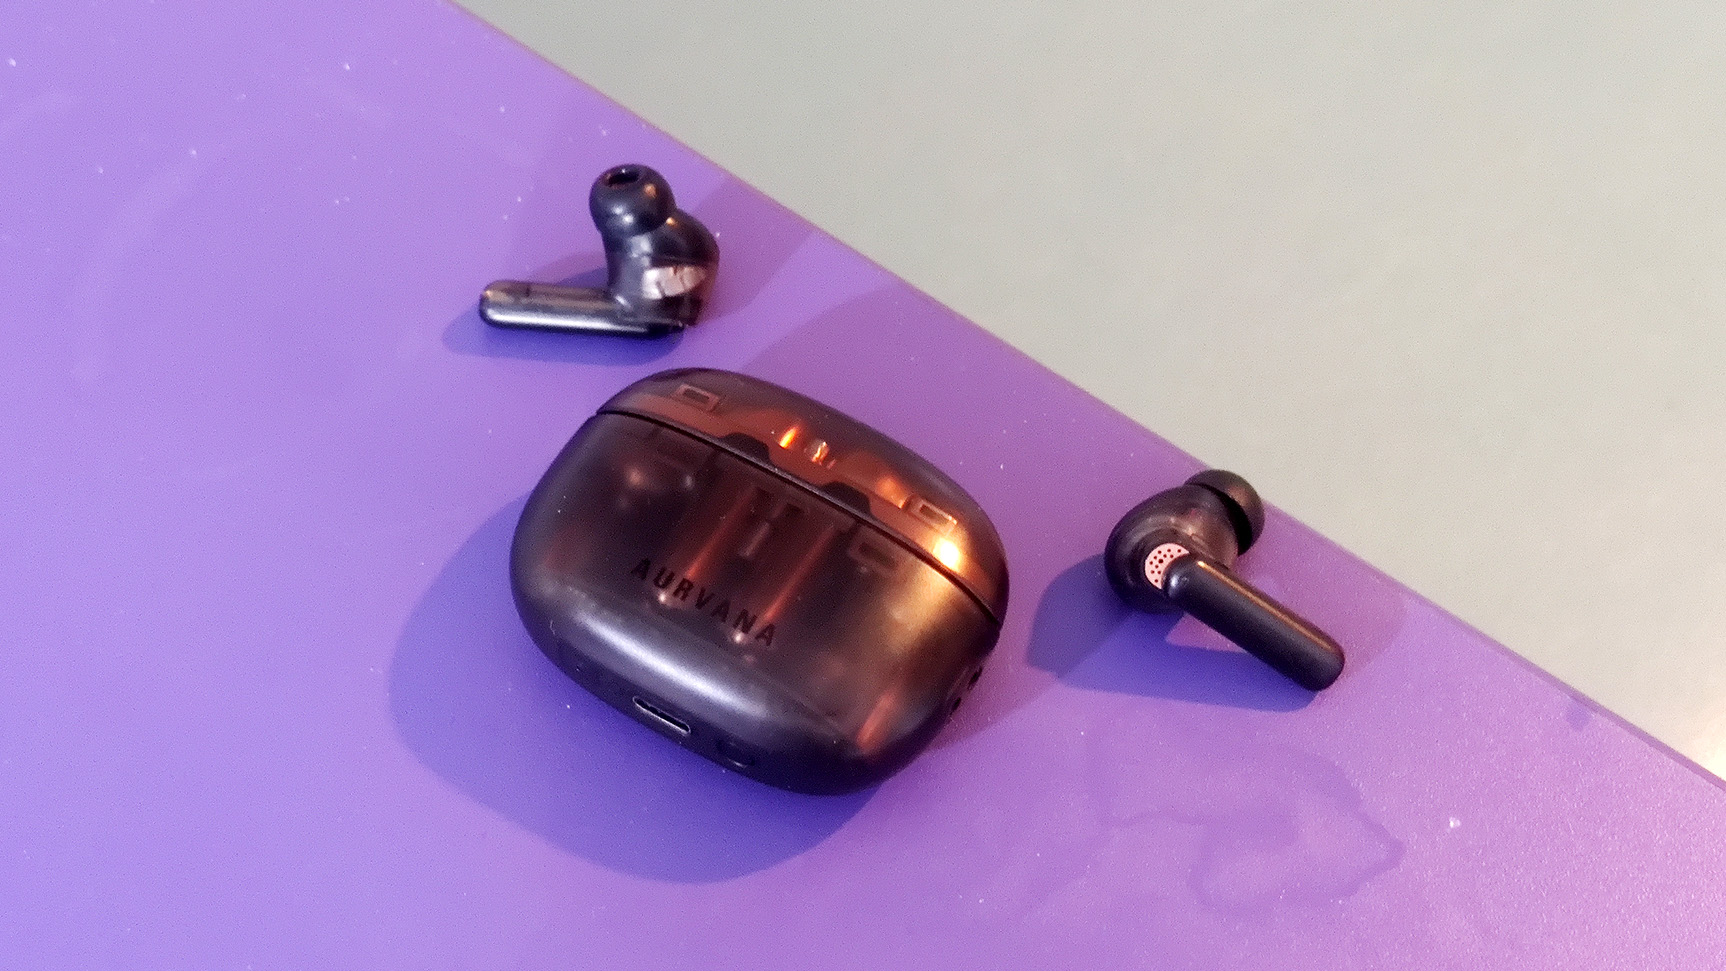 Creative Aurvana Ace 2 review: ace-sounding earbuds let down by noise cancelling snafus